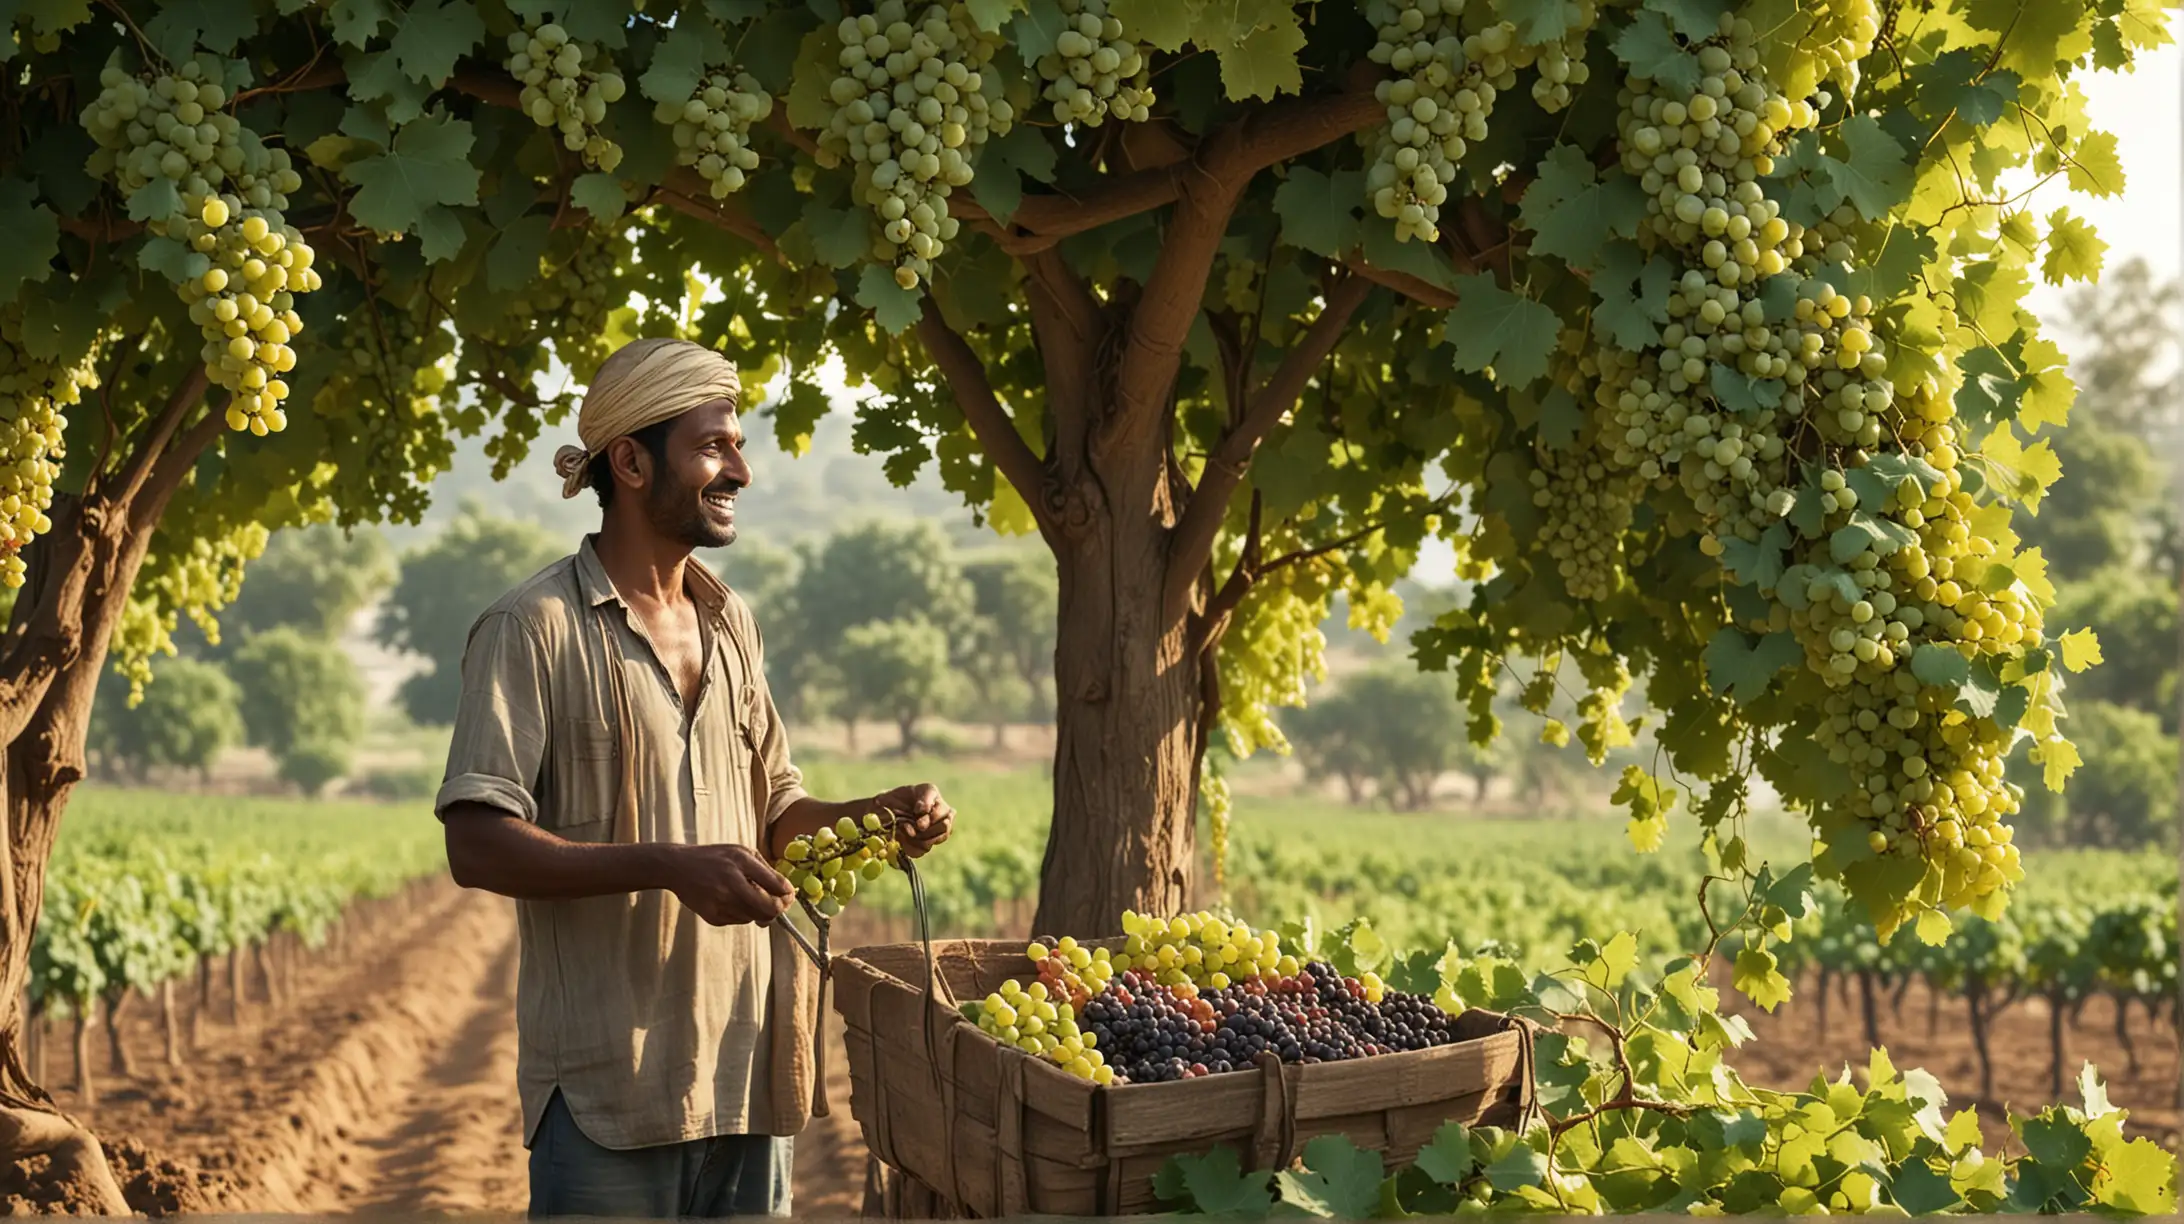 Generate series of AI images for story telling of an Indian Farmer cultivating grapes, with full canopy  depicting the following ; a happy farmer using organic products having a trouble free farming experience showing application of fertilizer and bumber harvest